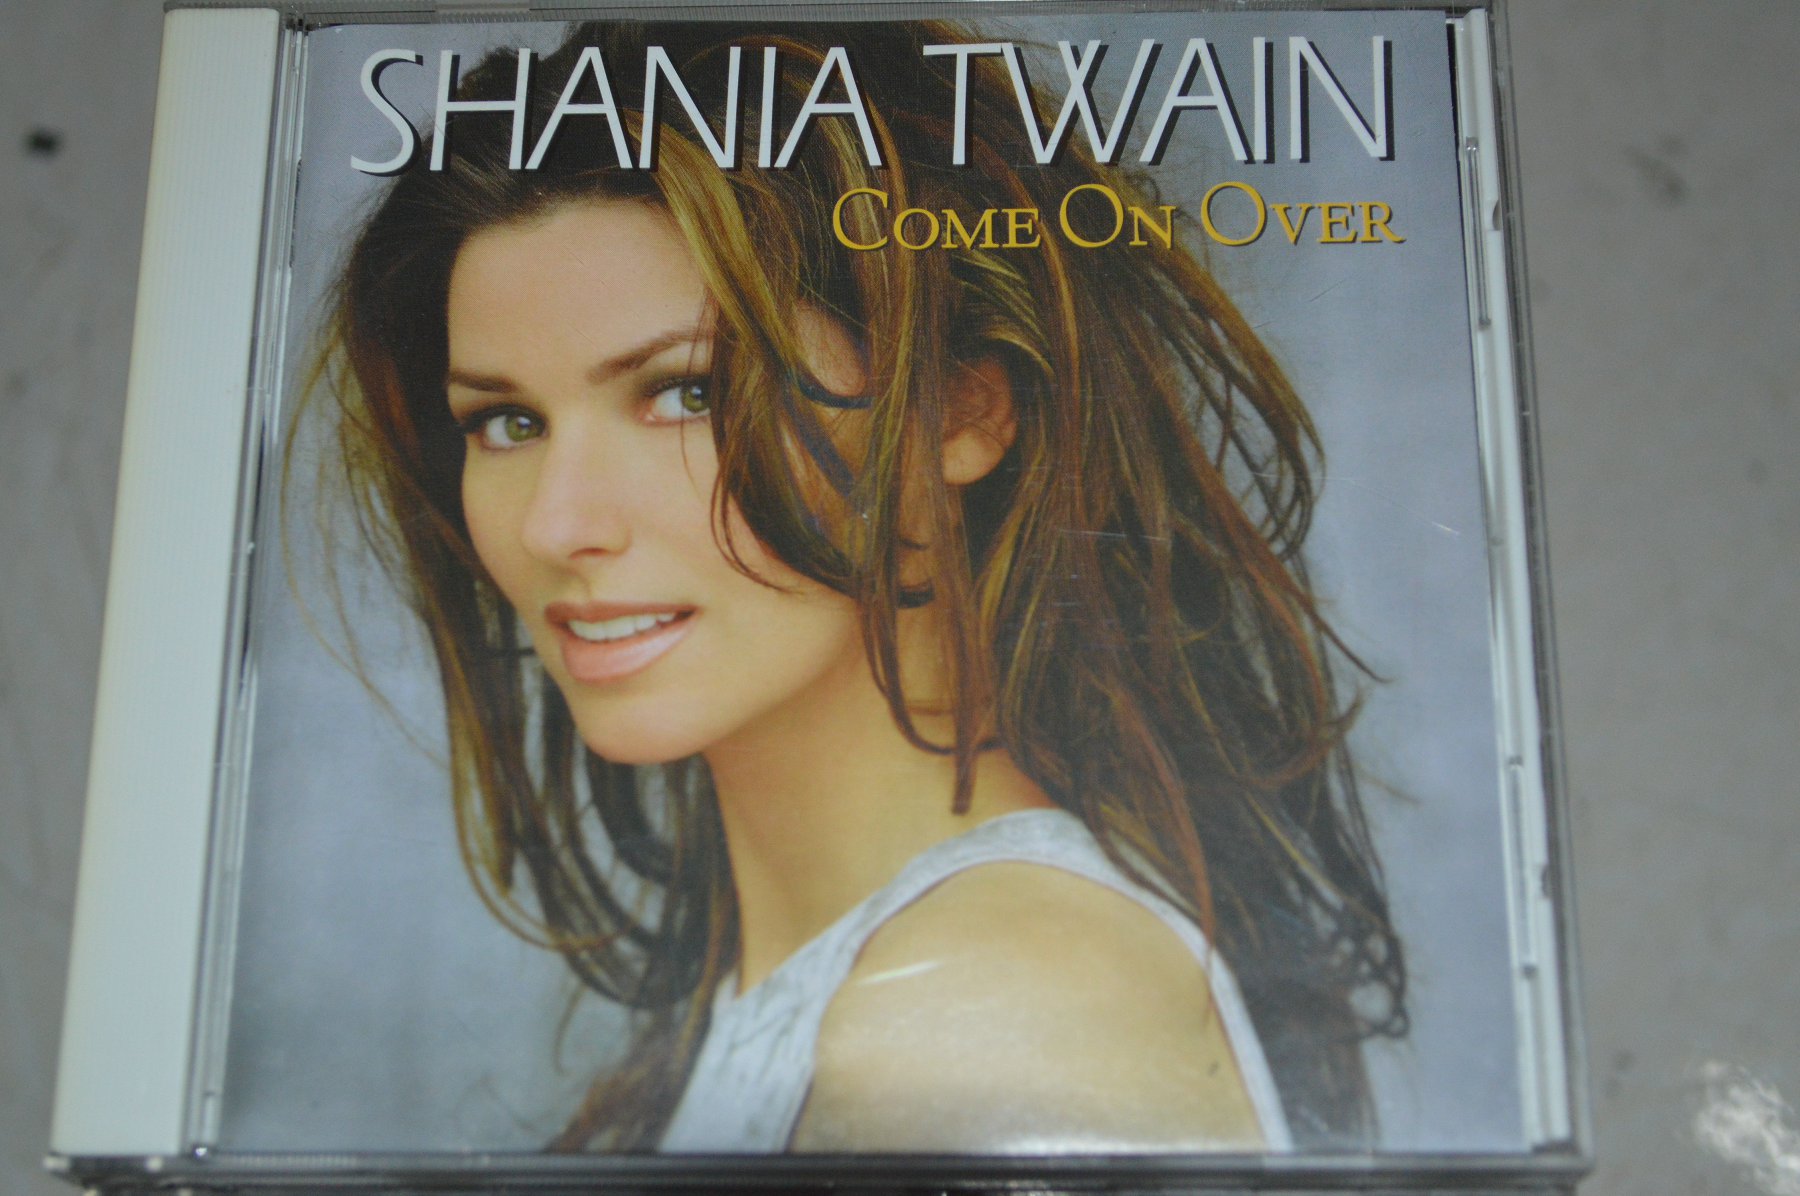 shania twain come on over 日版 L655优惠价16